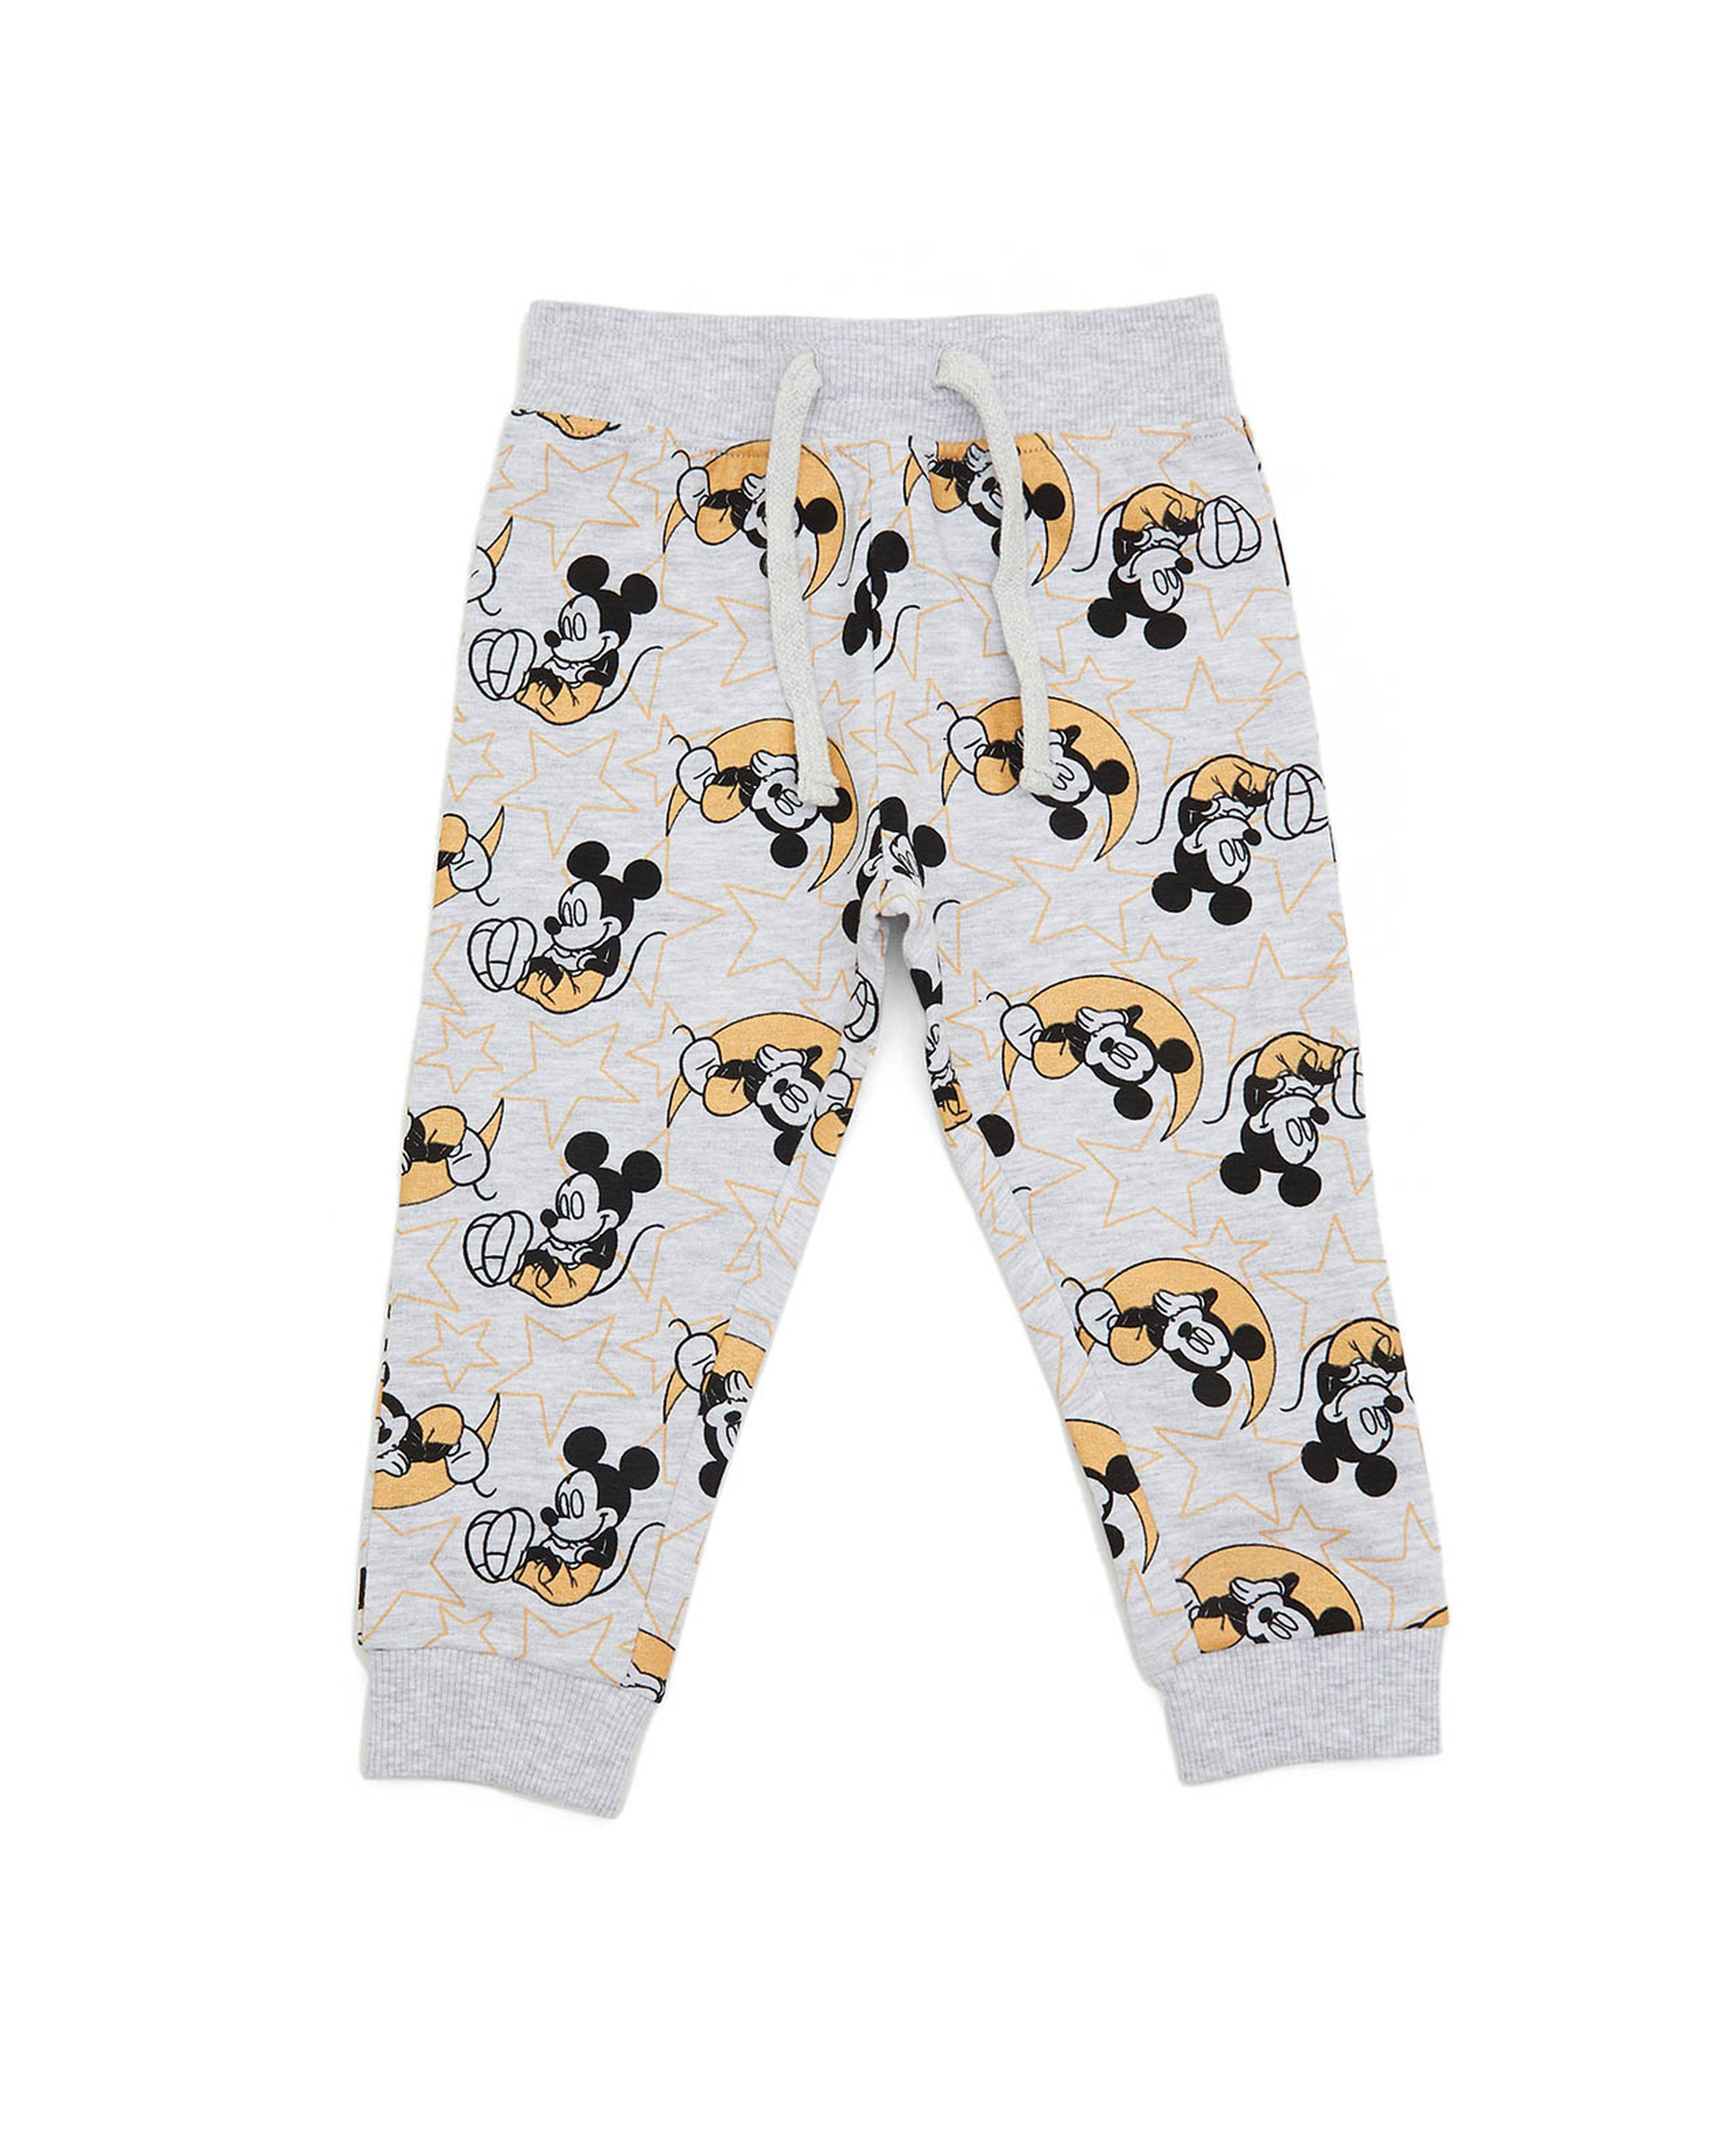 Mickey Mouse Printed clothing Set